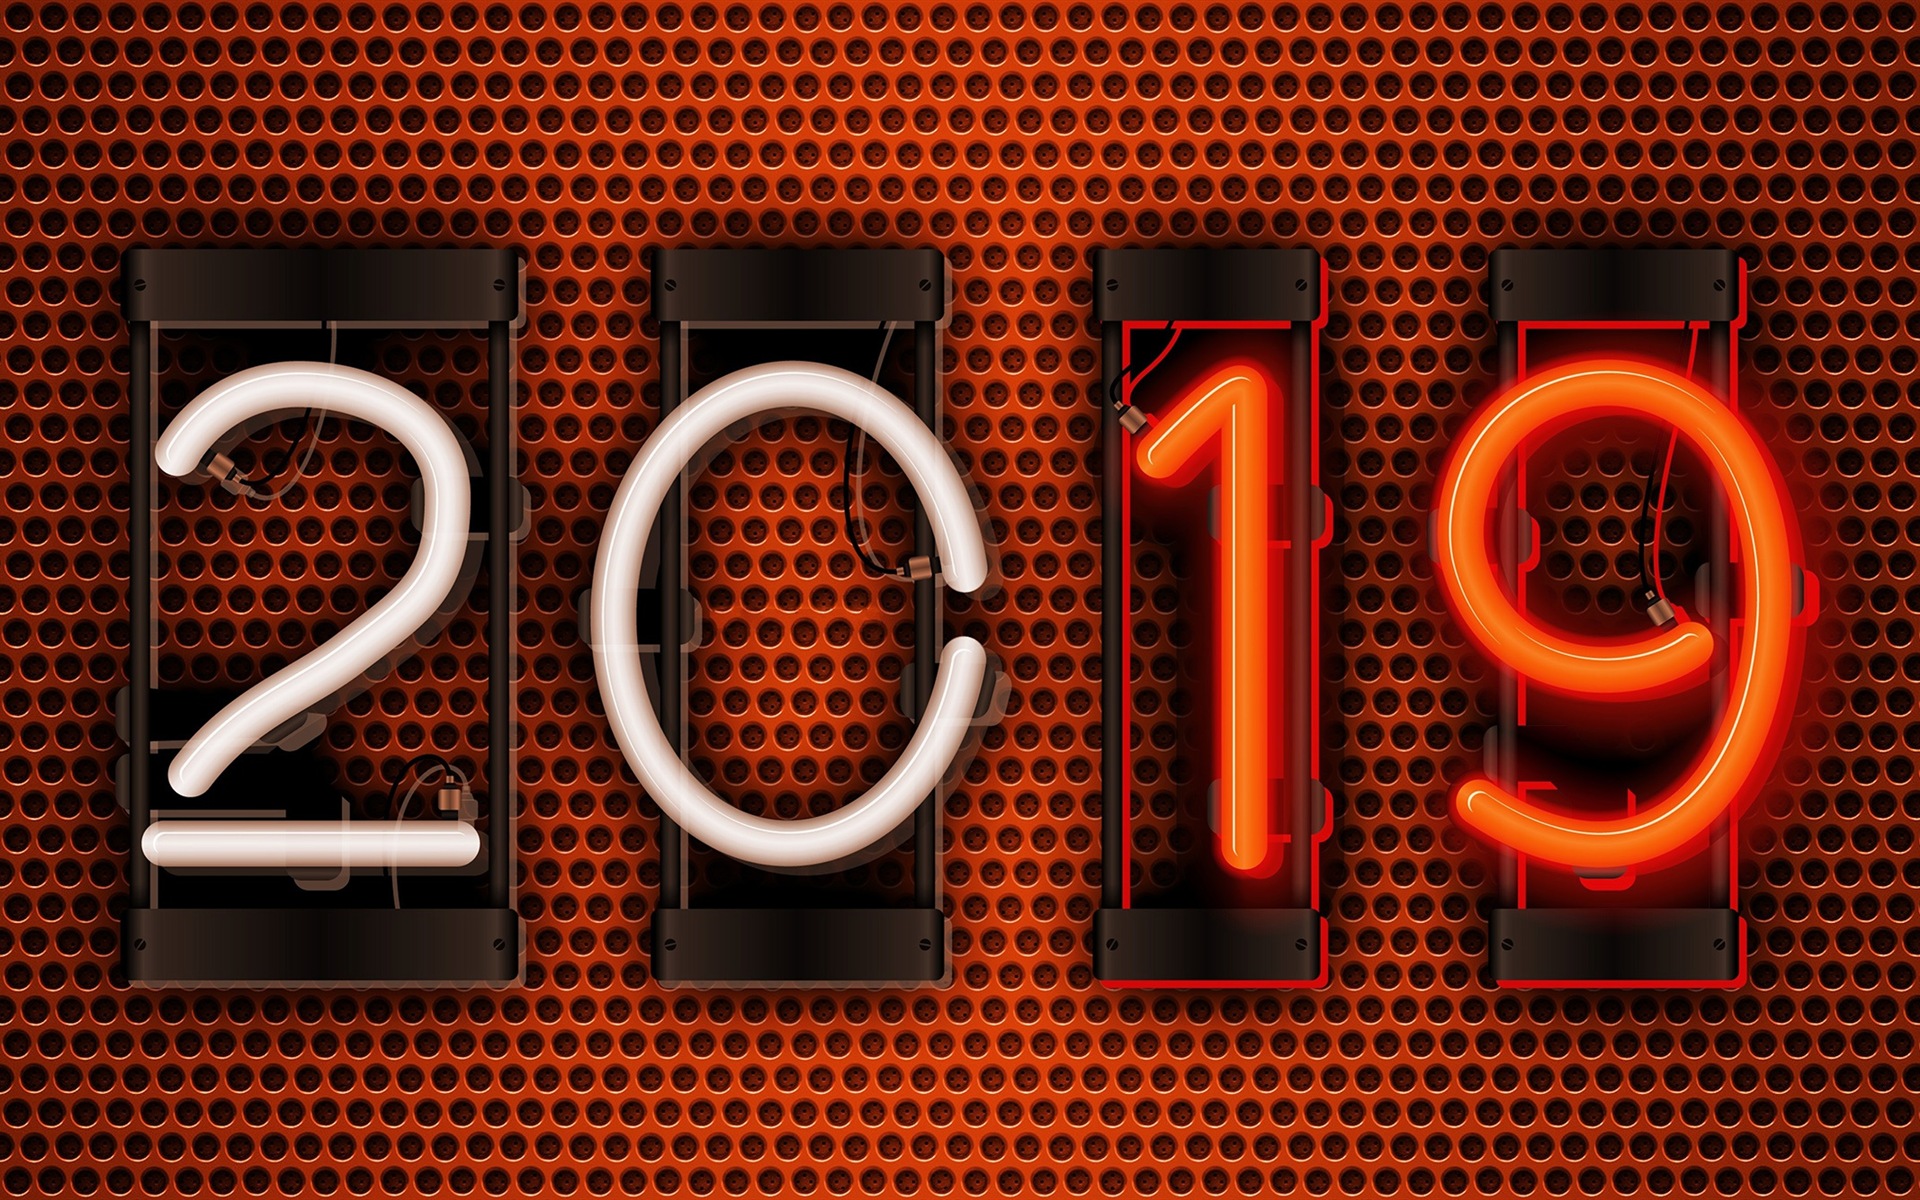 Happy New Year 2019 HD wallpapers #3 - 1920x1200